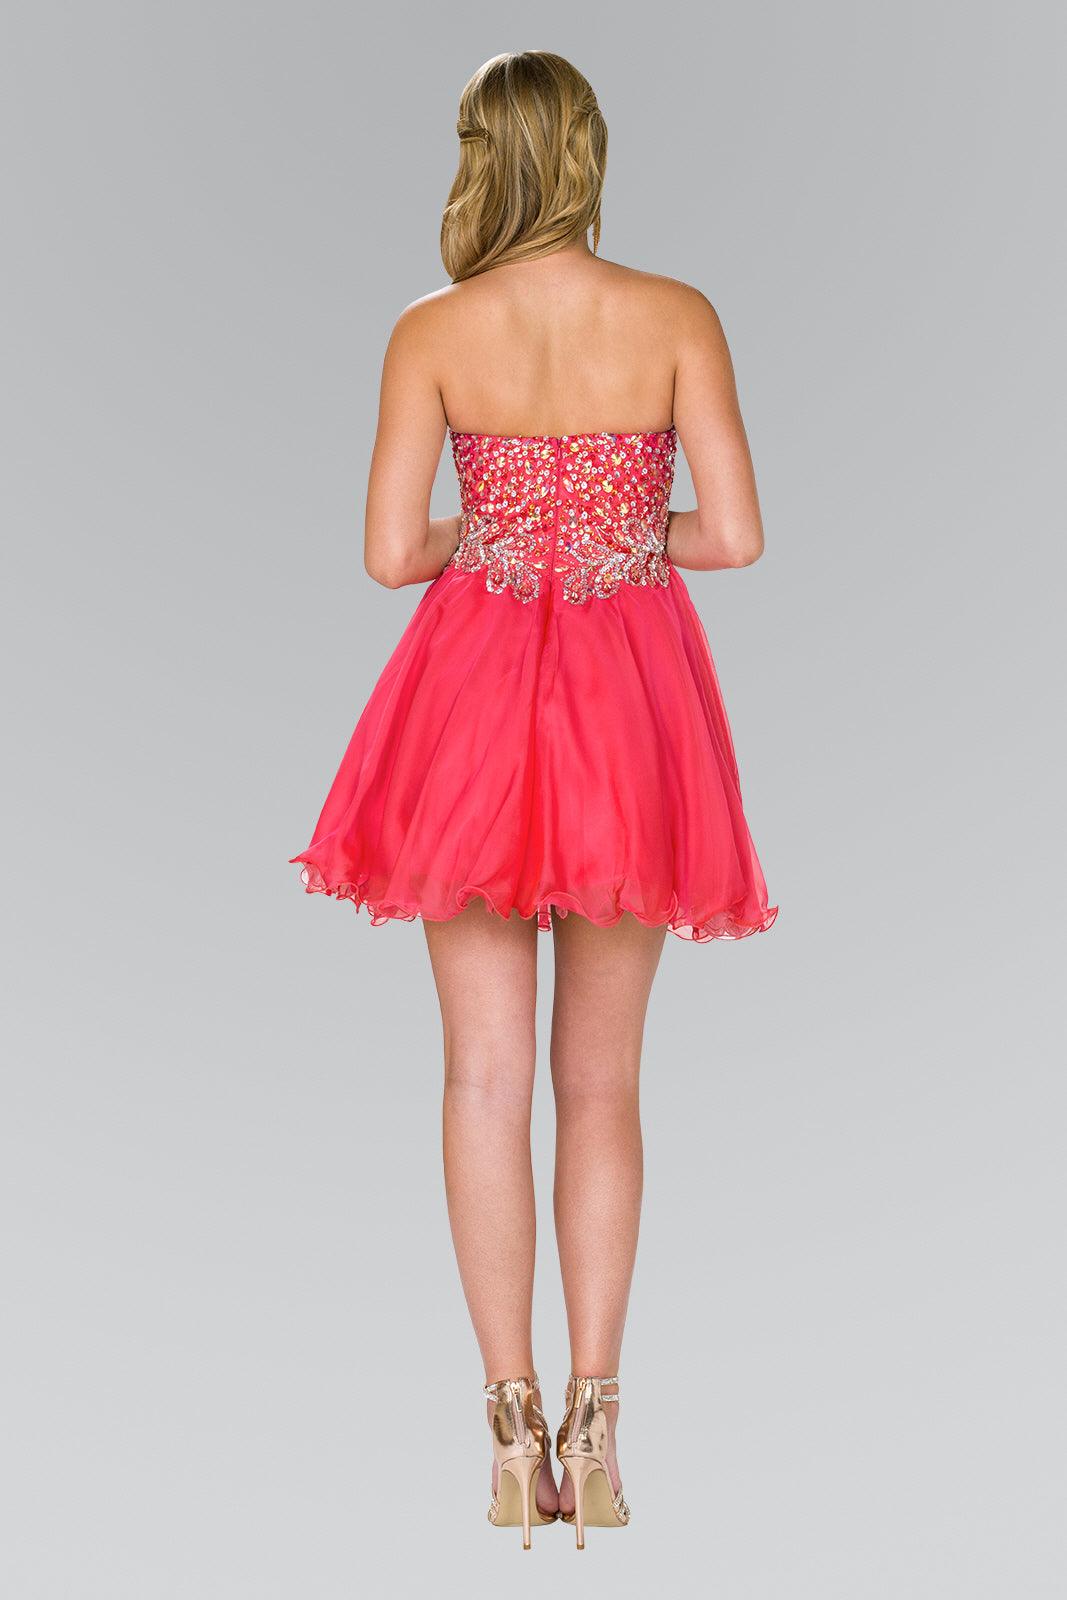 Strapless Sweetheart Short Prom Dress - The Dress Outlet